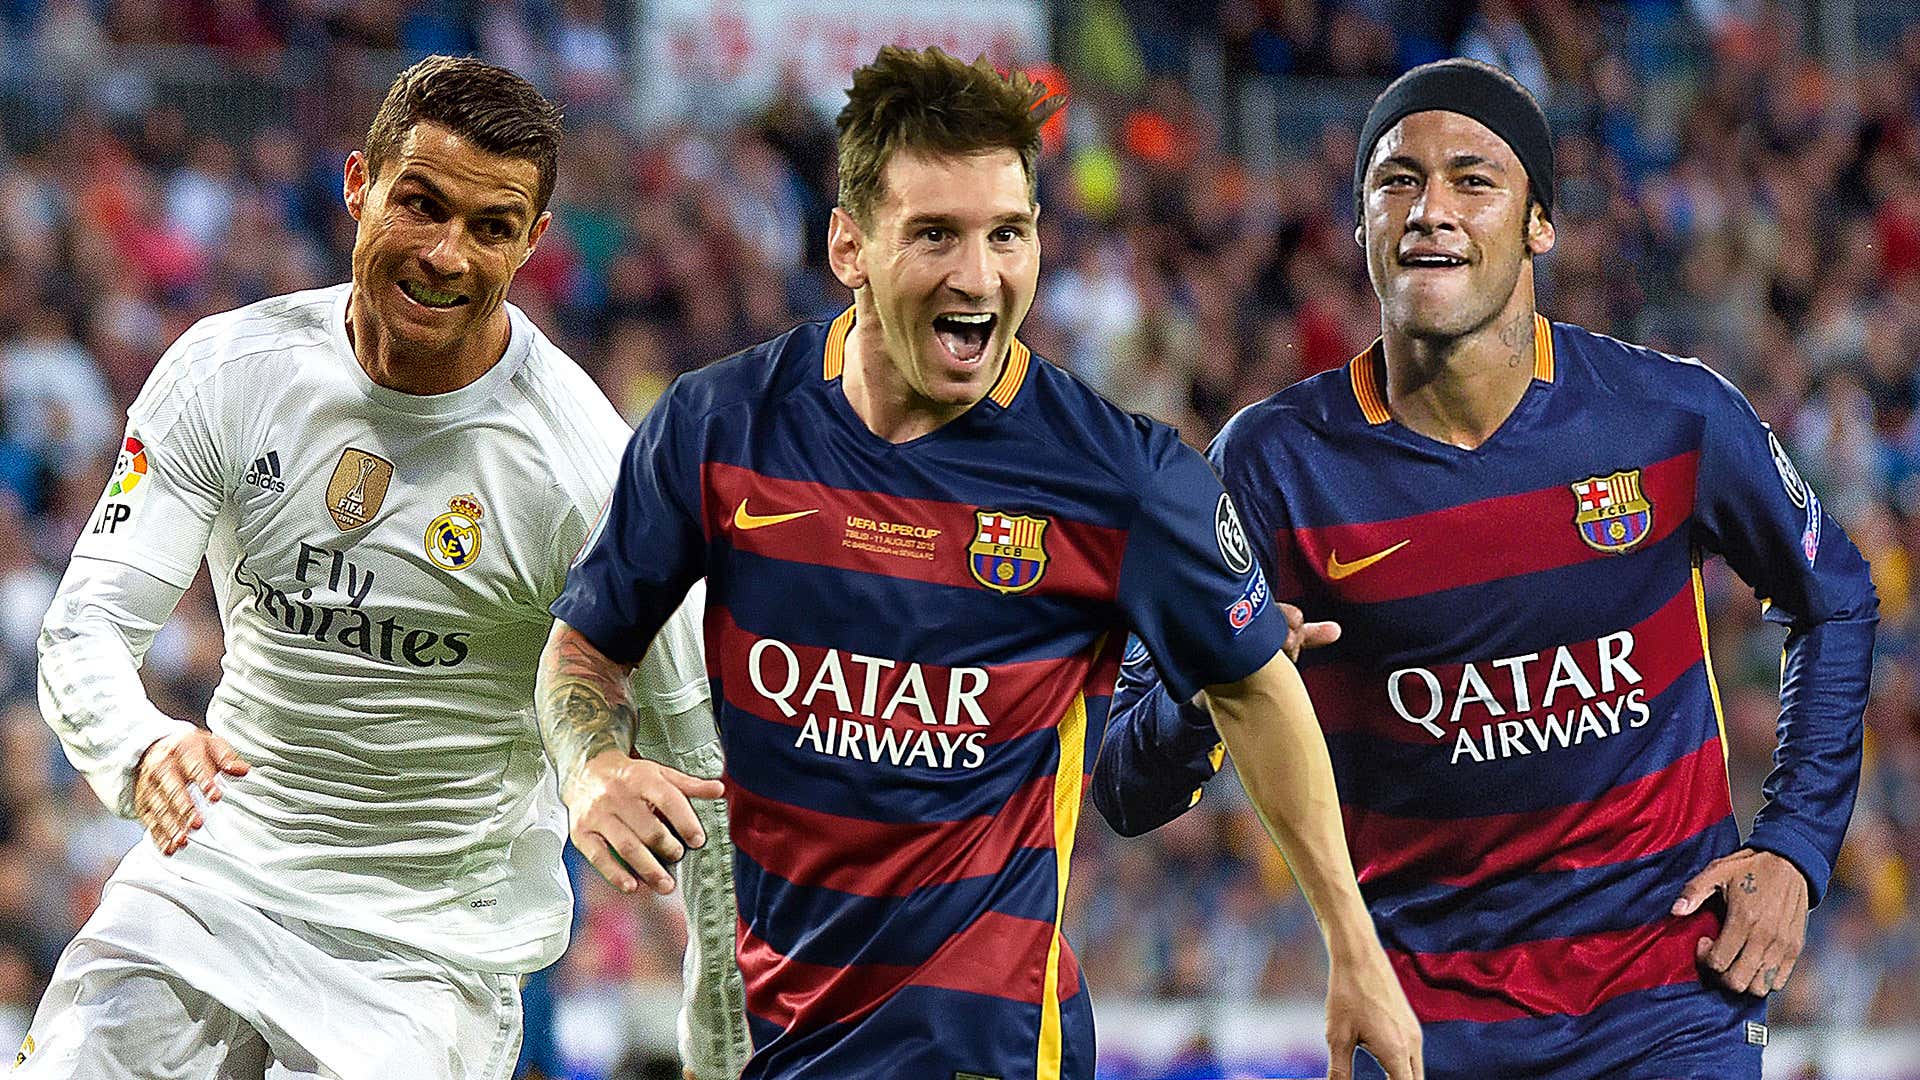 Messi, Ronaldo, Neymar and the race for the Ballon d'Or 